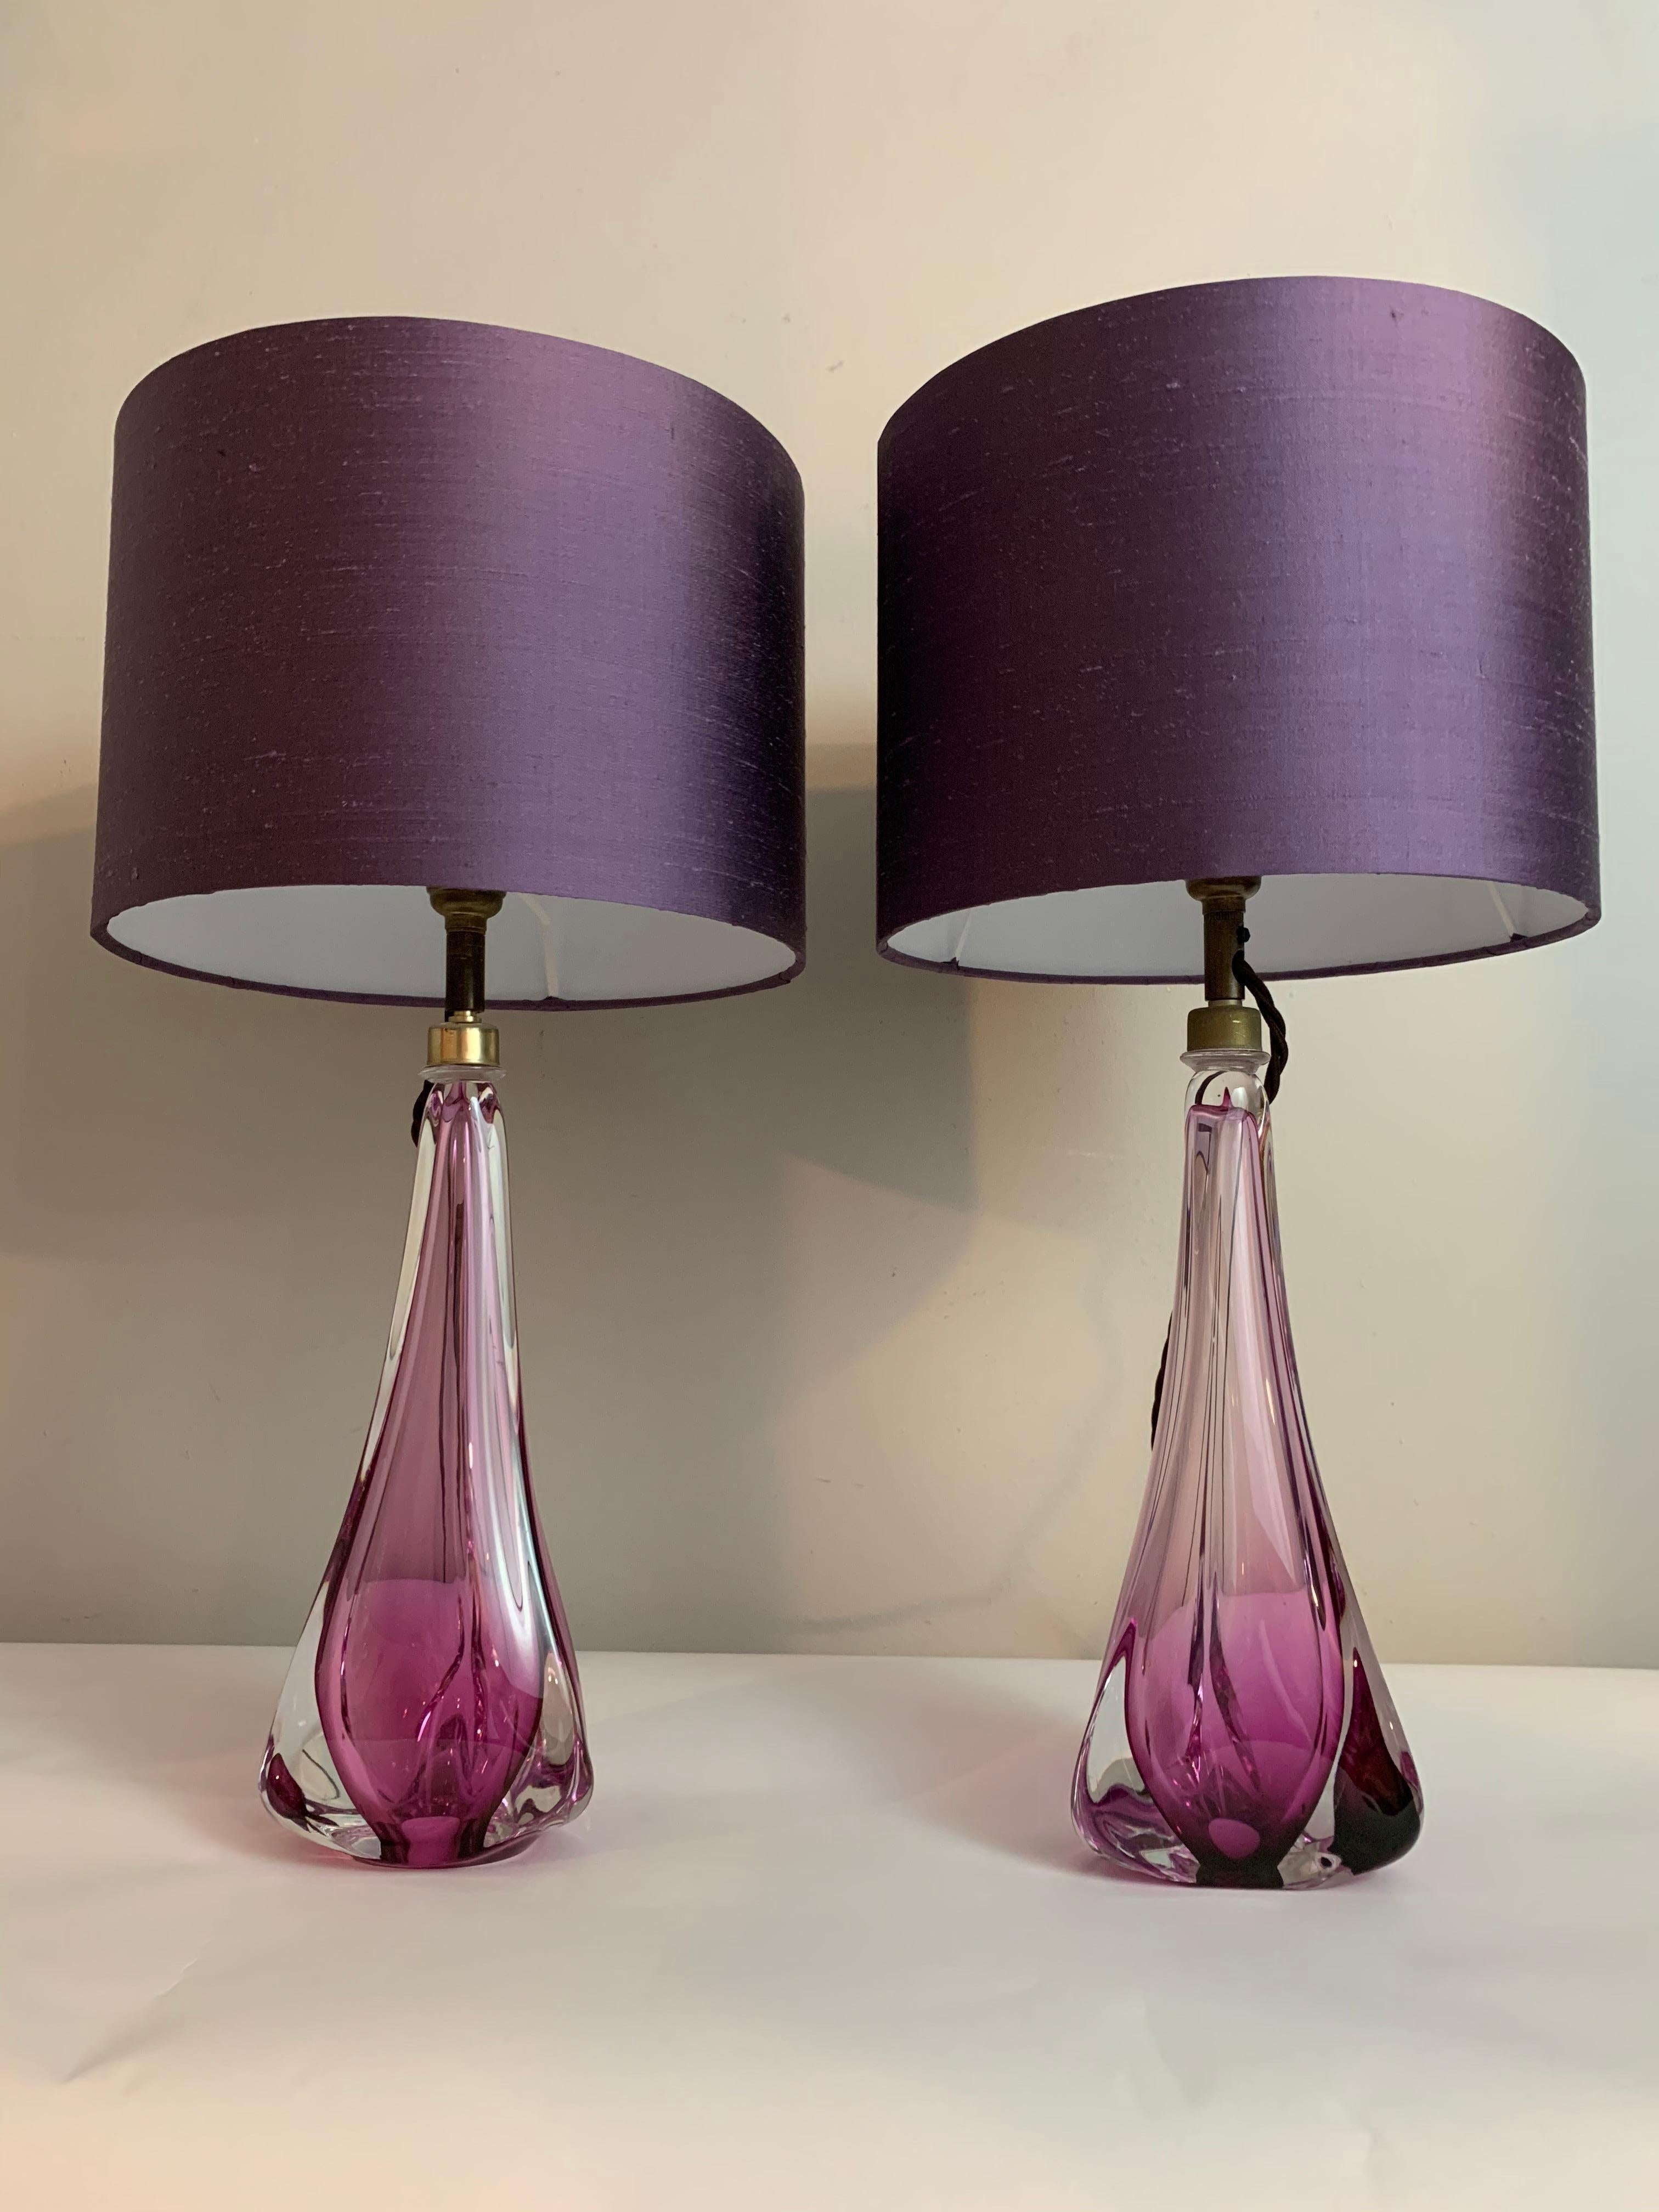 A pair of triangular 1950s Belgium Val St. Lambert purple and clear glass lamp bases including new silk shades. The lamps are a striking deep purple towards the base with thick clear glass on each corner. 

The lamps have the same design but as